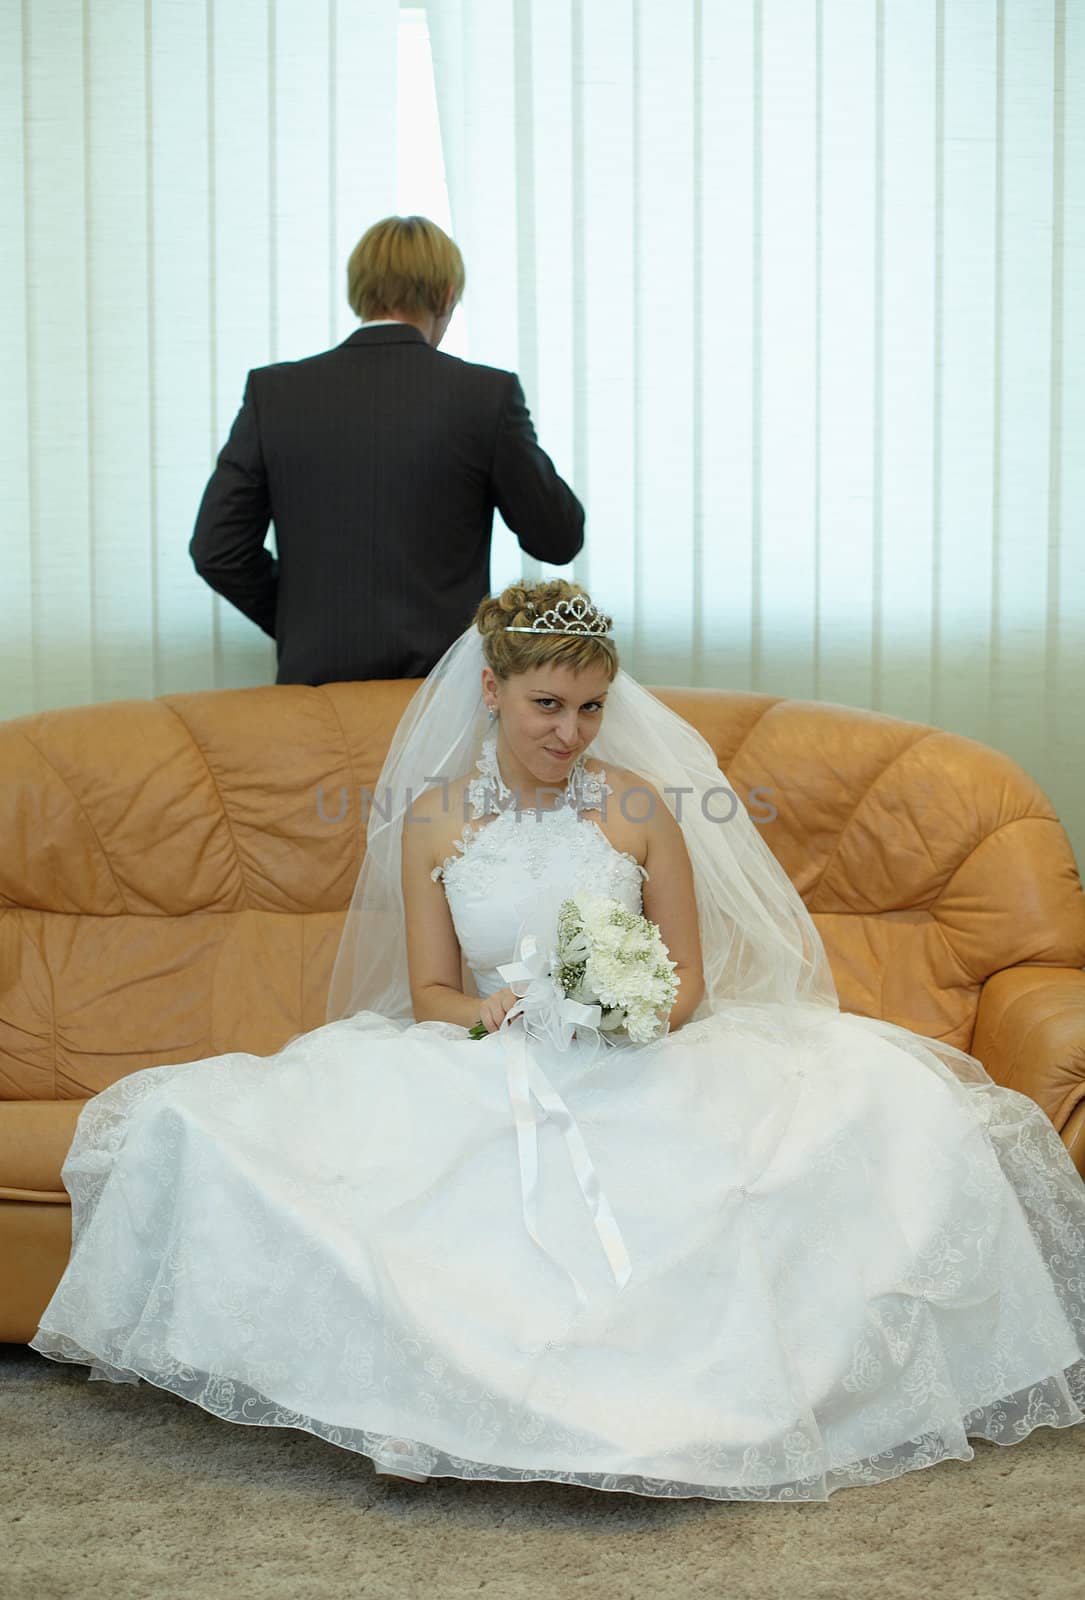 Bride sitting on the couch, and the groom looks out the window